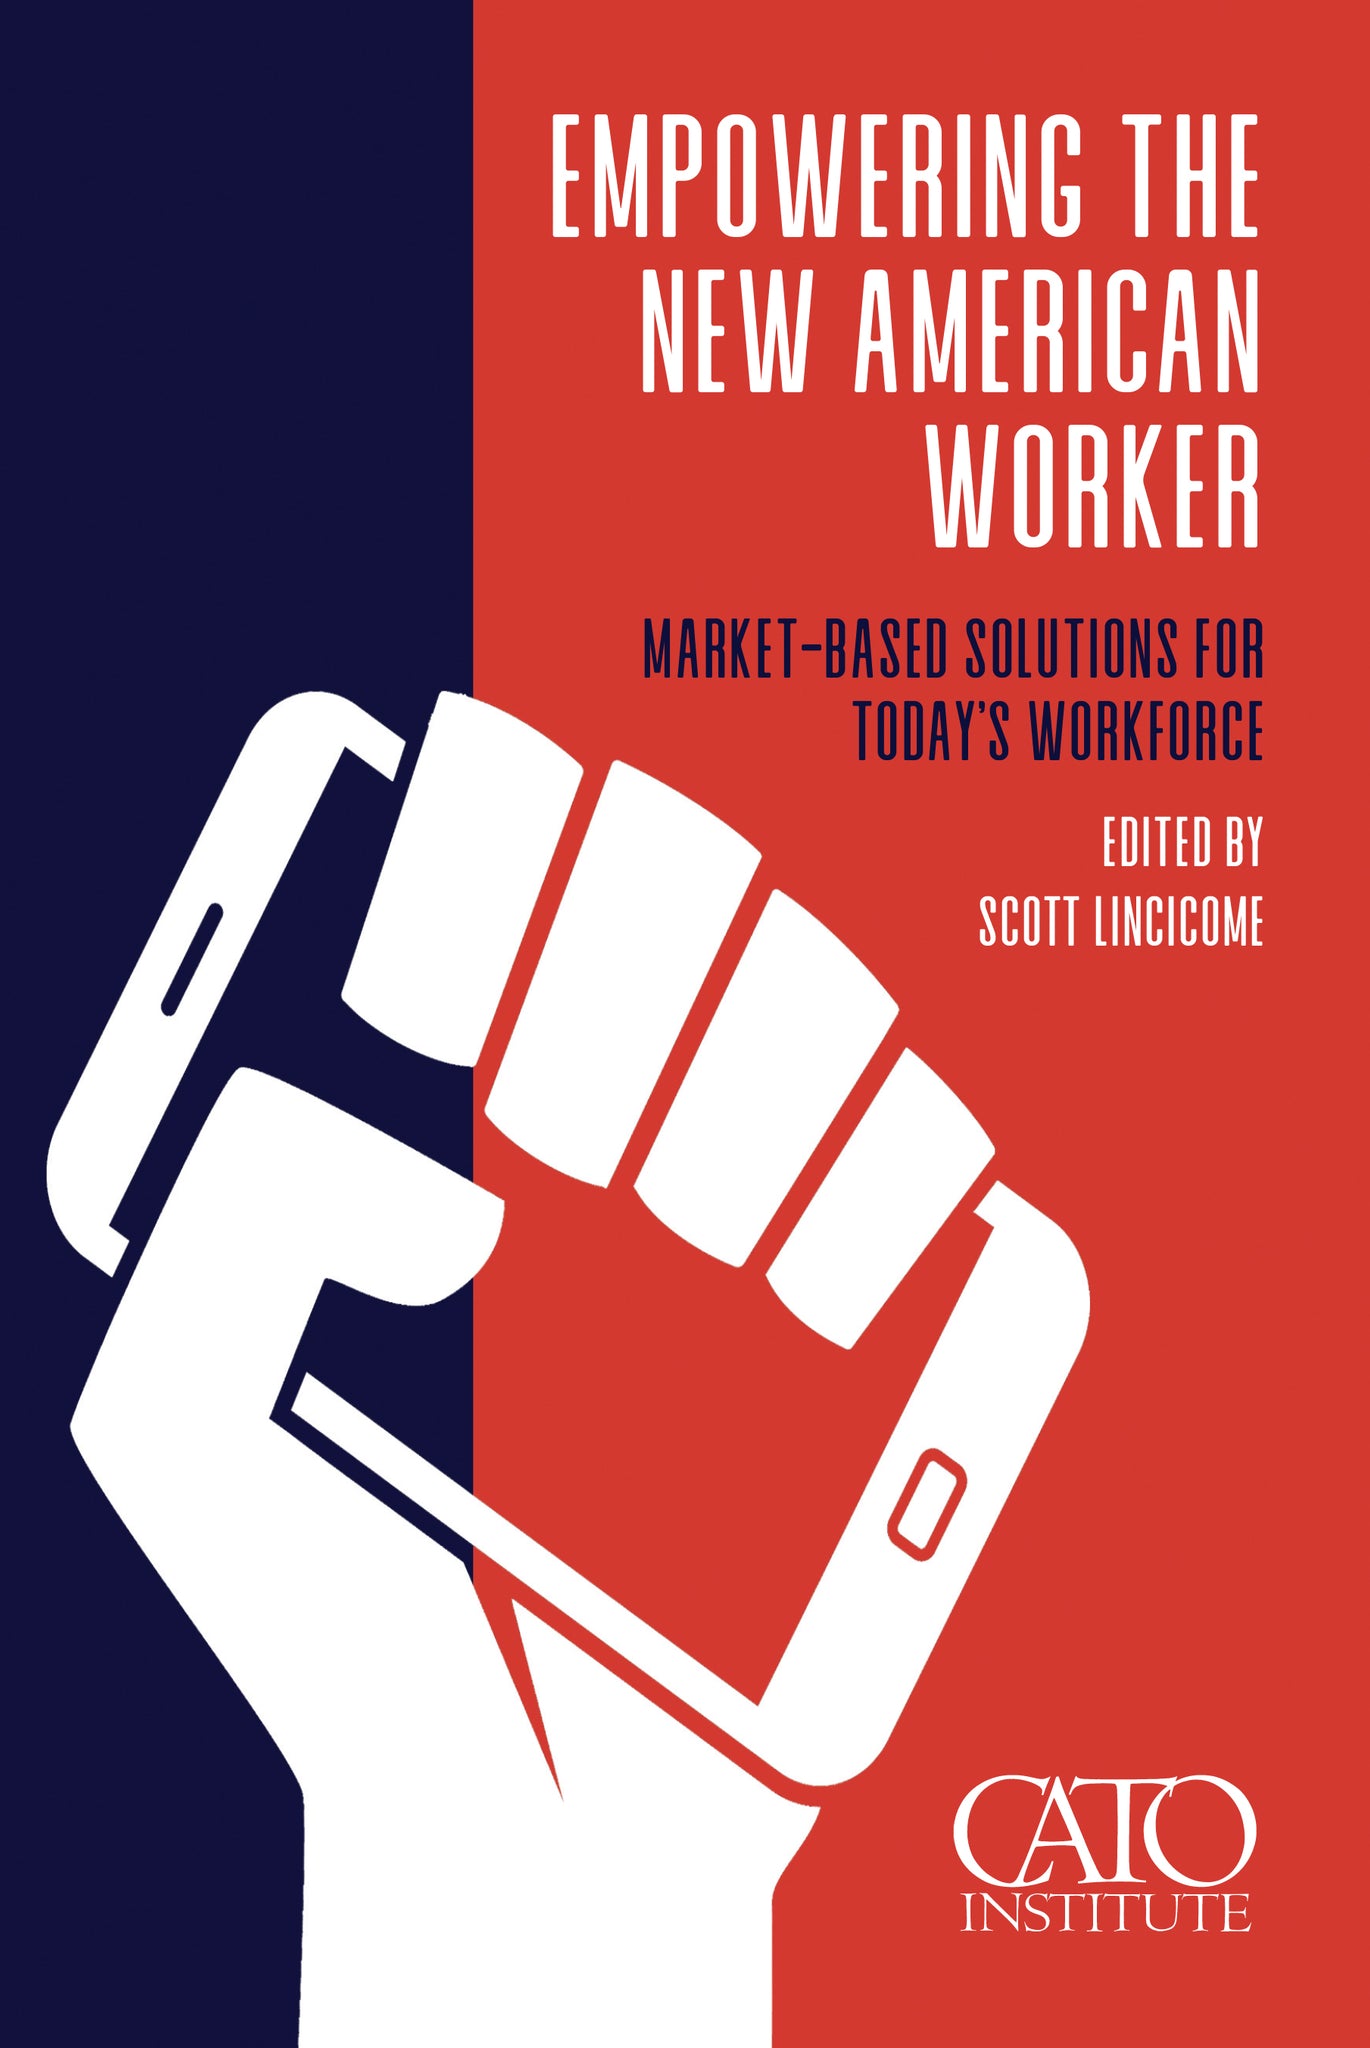 [Empowering the New American Worker]